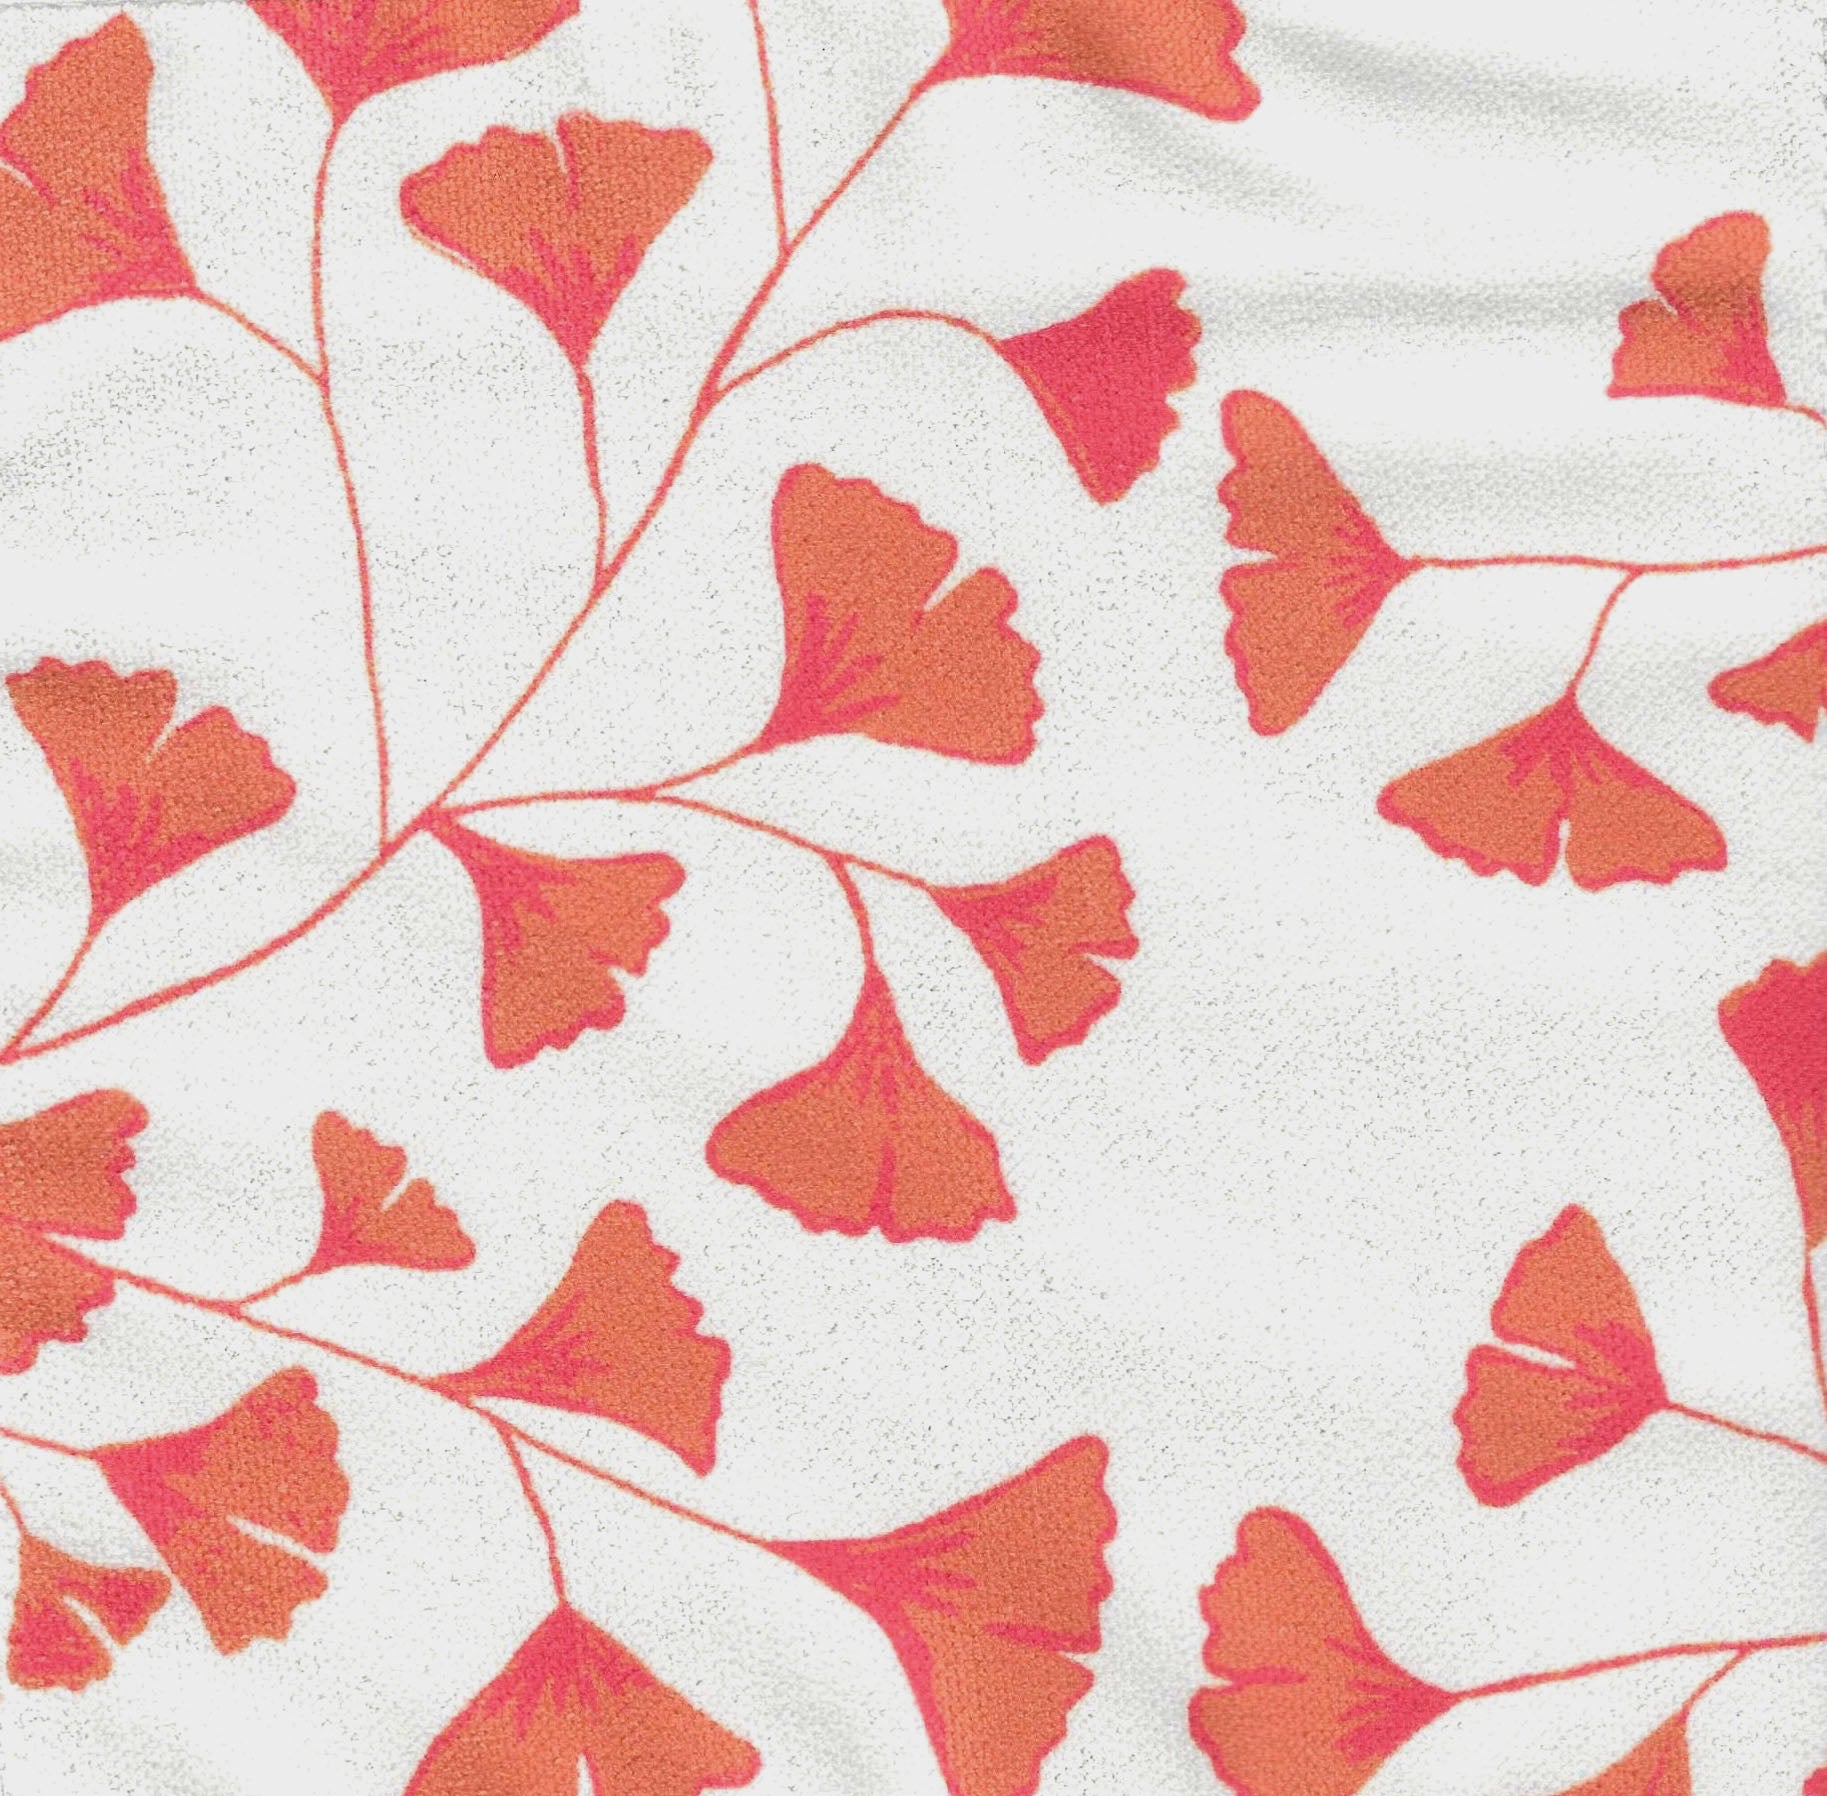 Ginkgo Leaves Fabric SAMPLE | Colour: Aurora Red